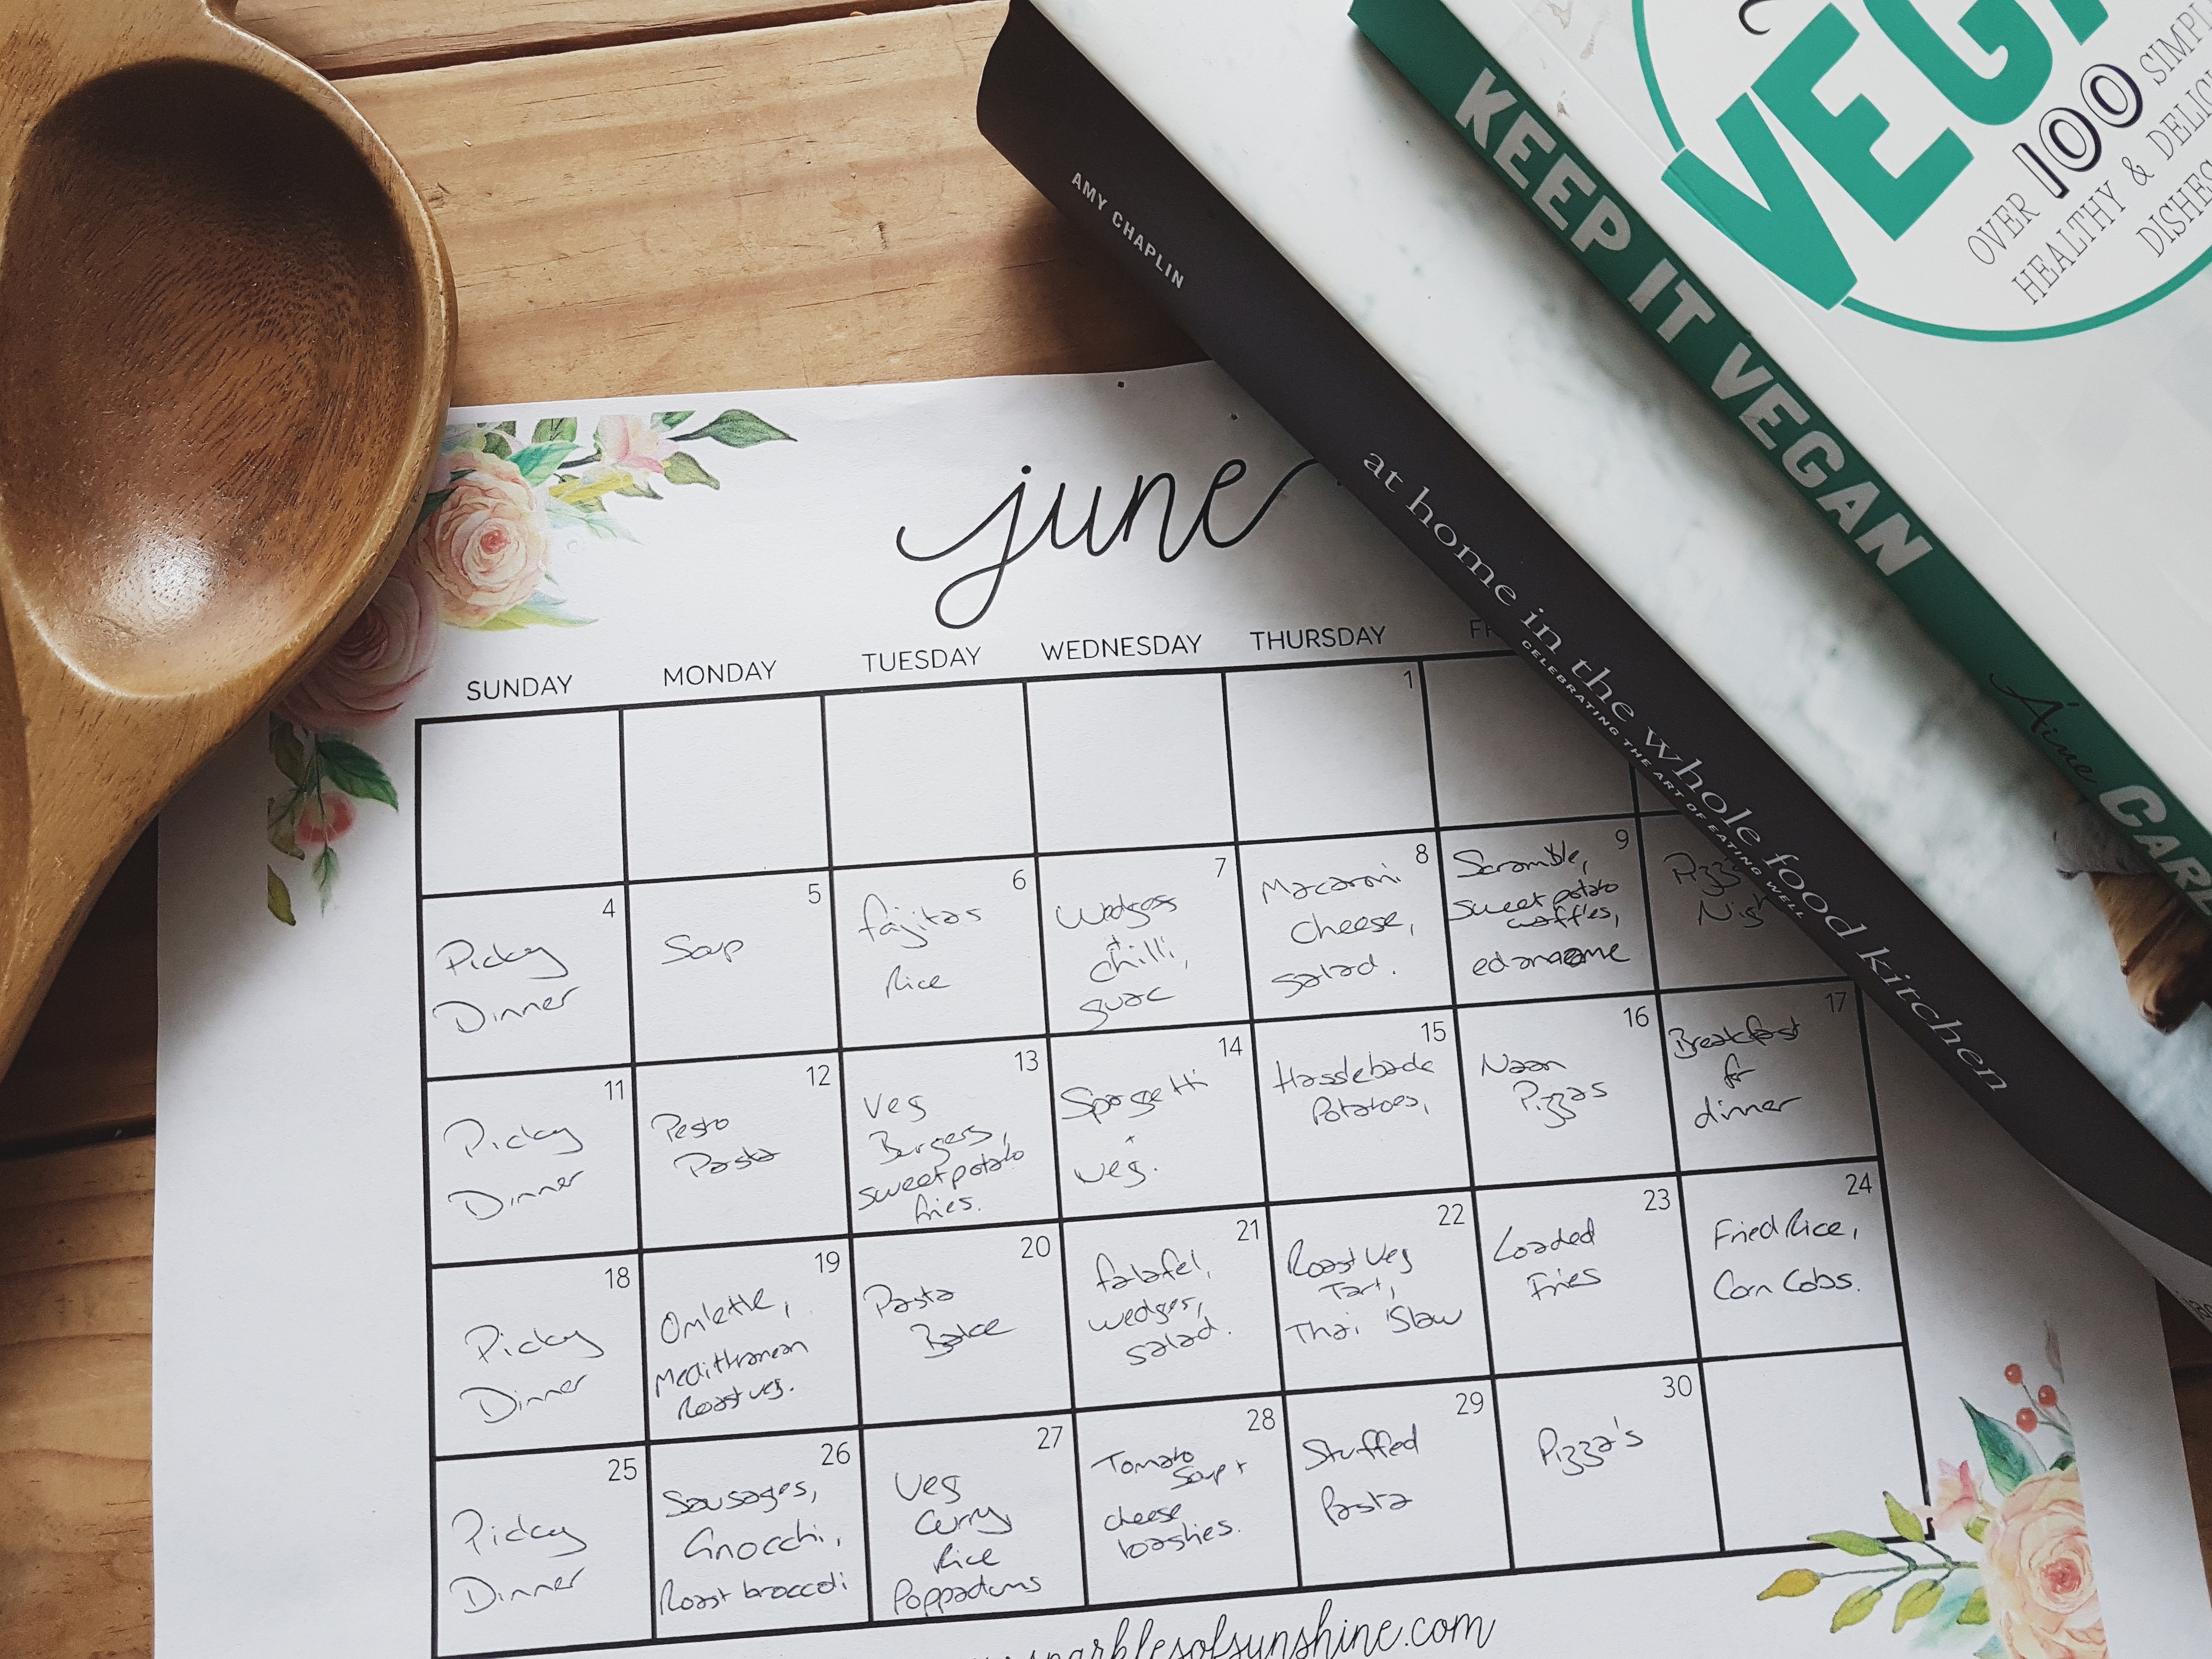 June’s Monthly Family Meal Plan